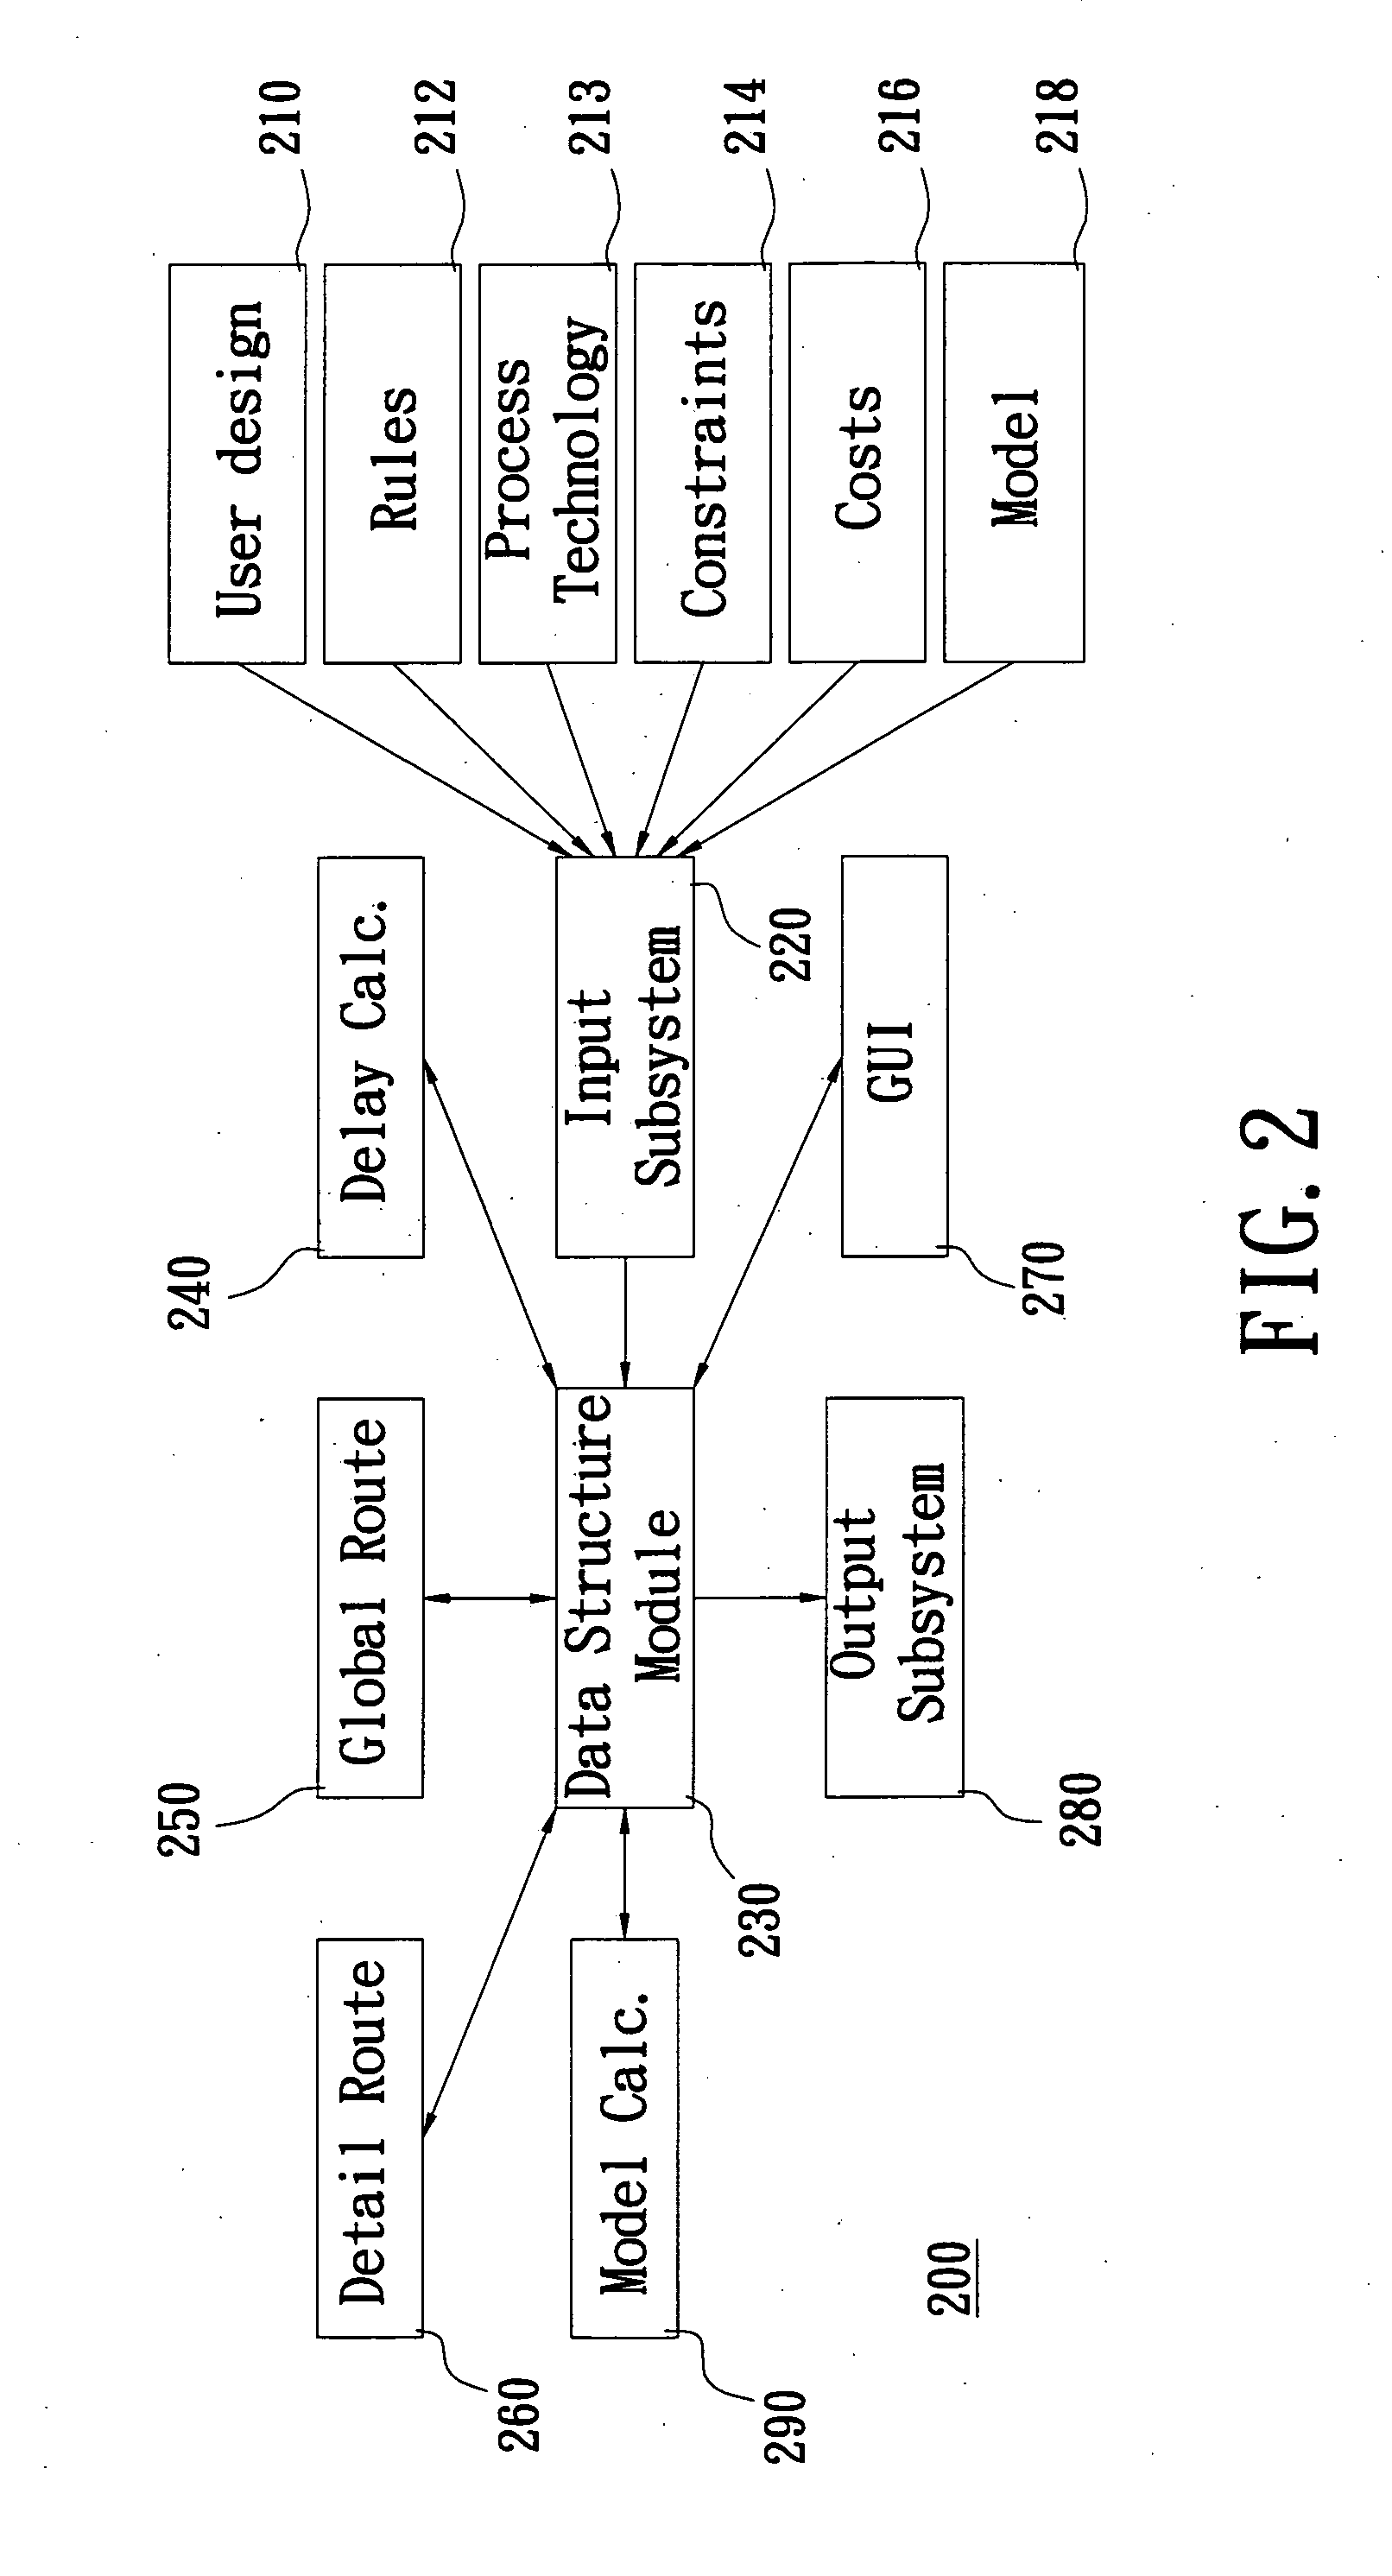 Apparatus for a routing system